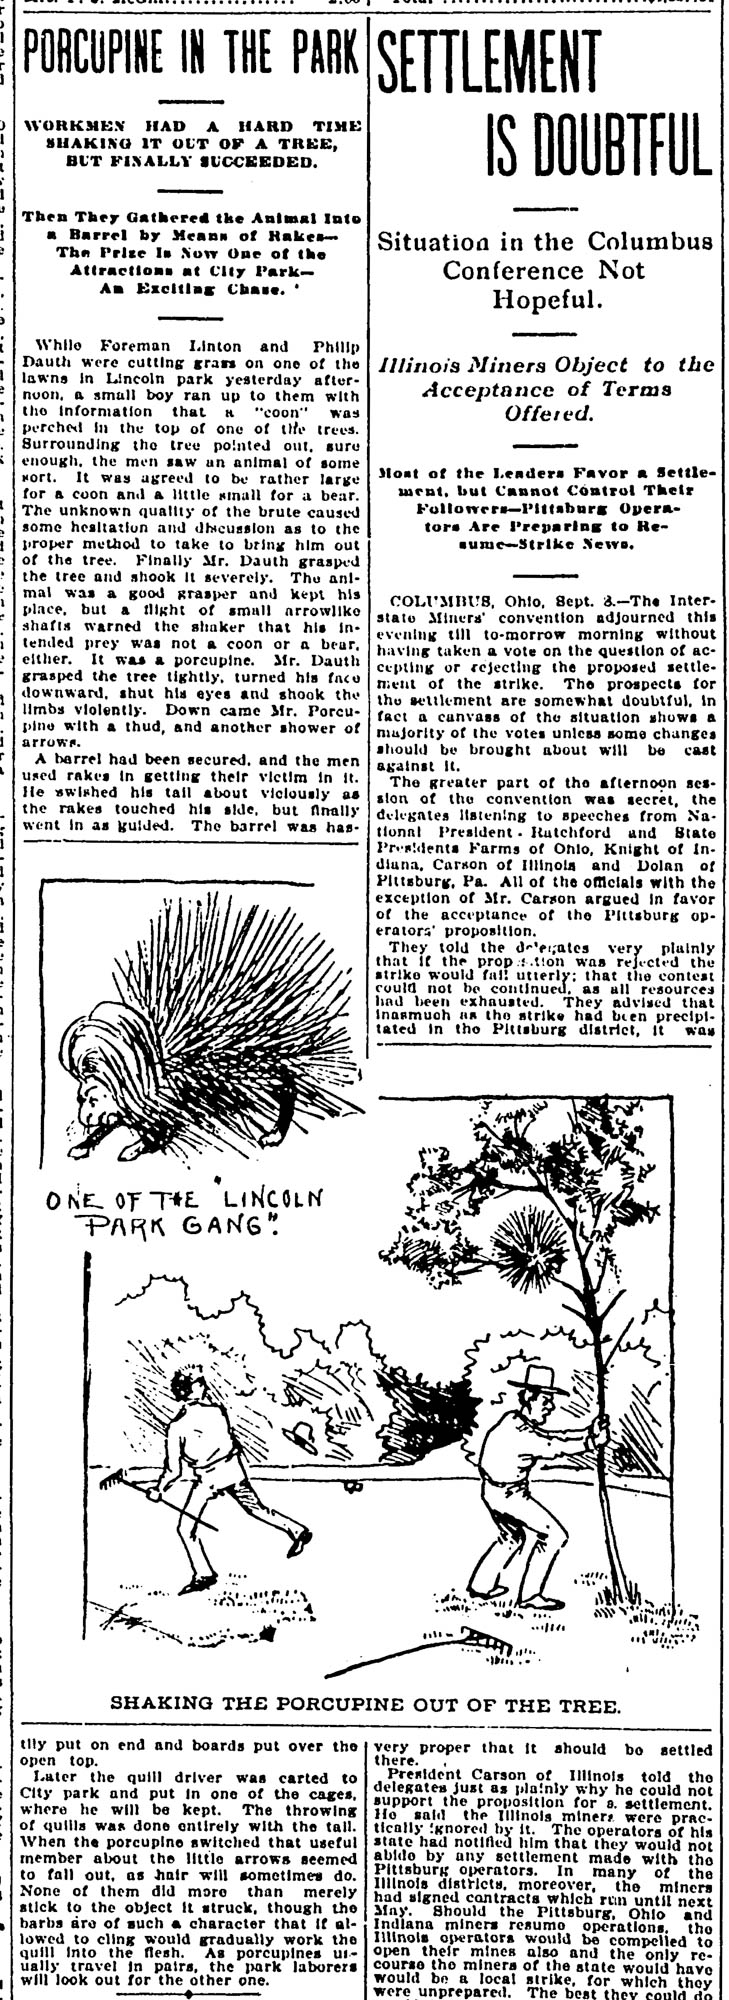 Dauth Family Archive - 1897-09-09 - Denver Rocky Mountain News - Philip Dauth Porcupine Story And Sketch